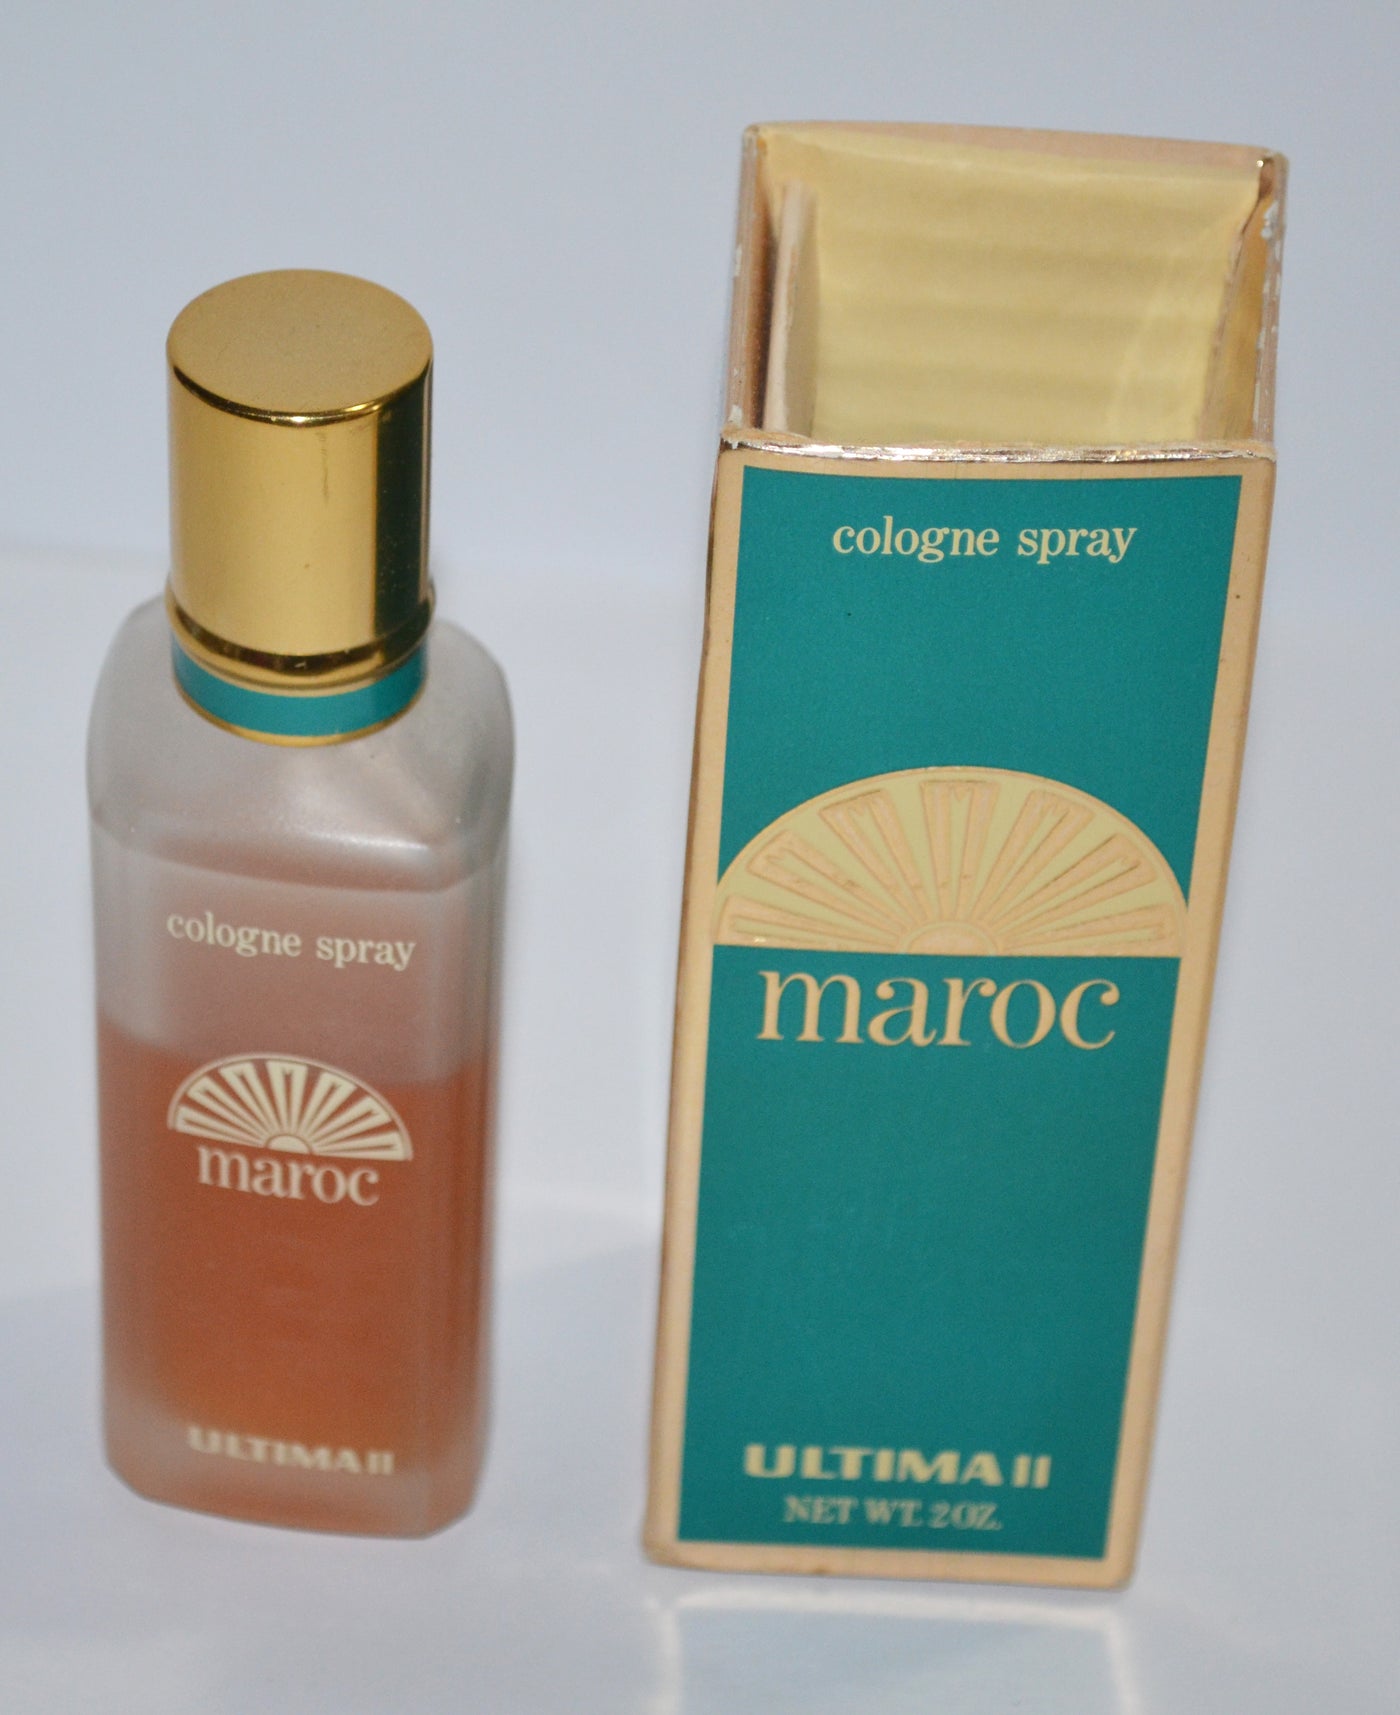 Vintage Maroc Cologne Spray By Ultima II - Charles Revson